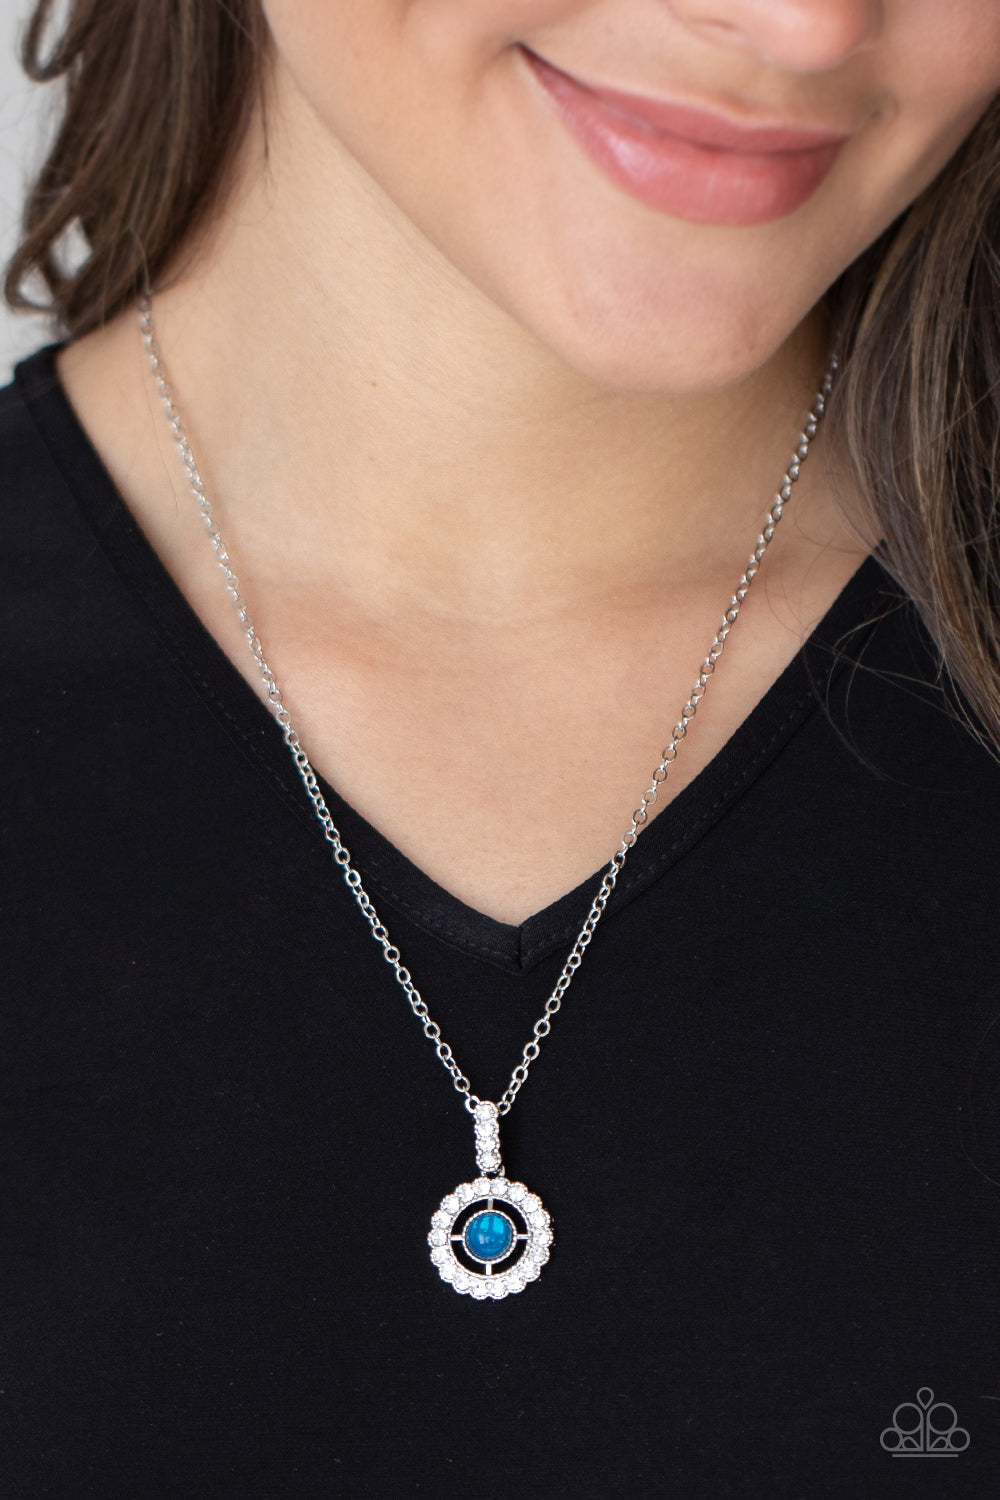 PRE-ORDER - Paparazzi Springtime Twinkle - Blue - Necklace & Earrings - $5 Jewelry with Ashley Swint